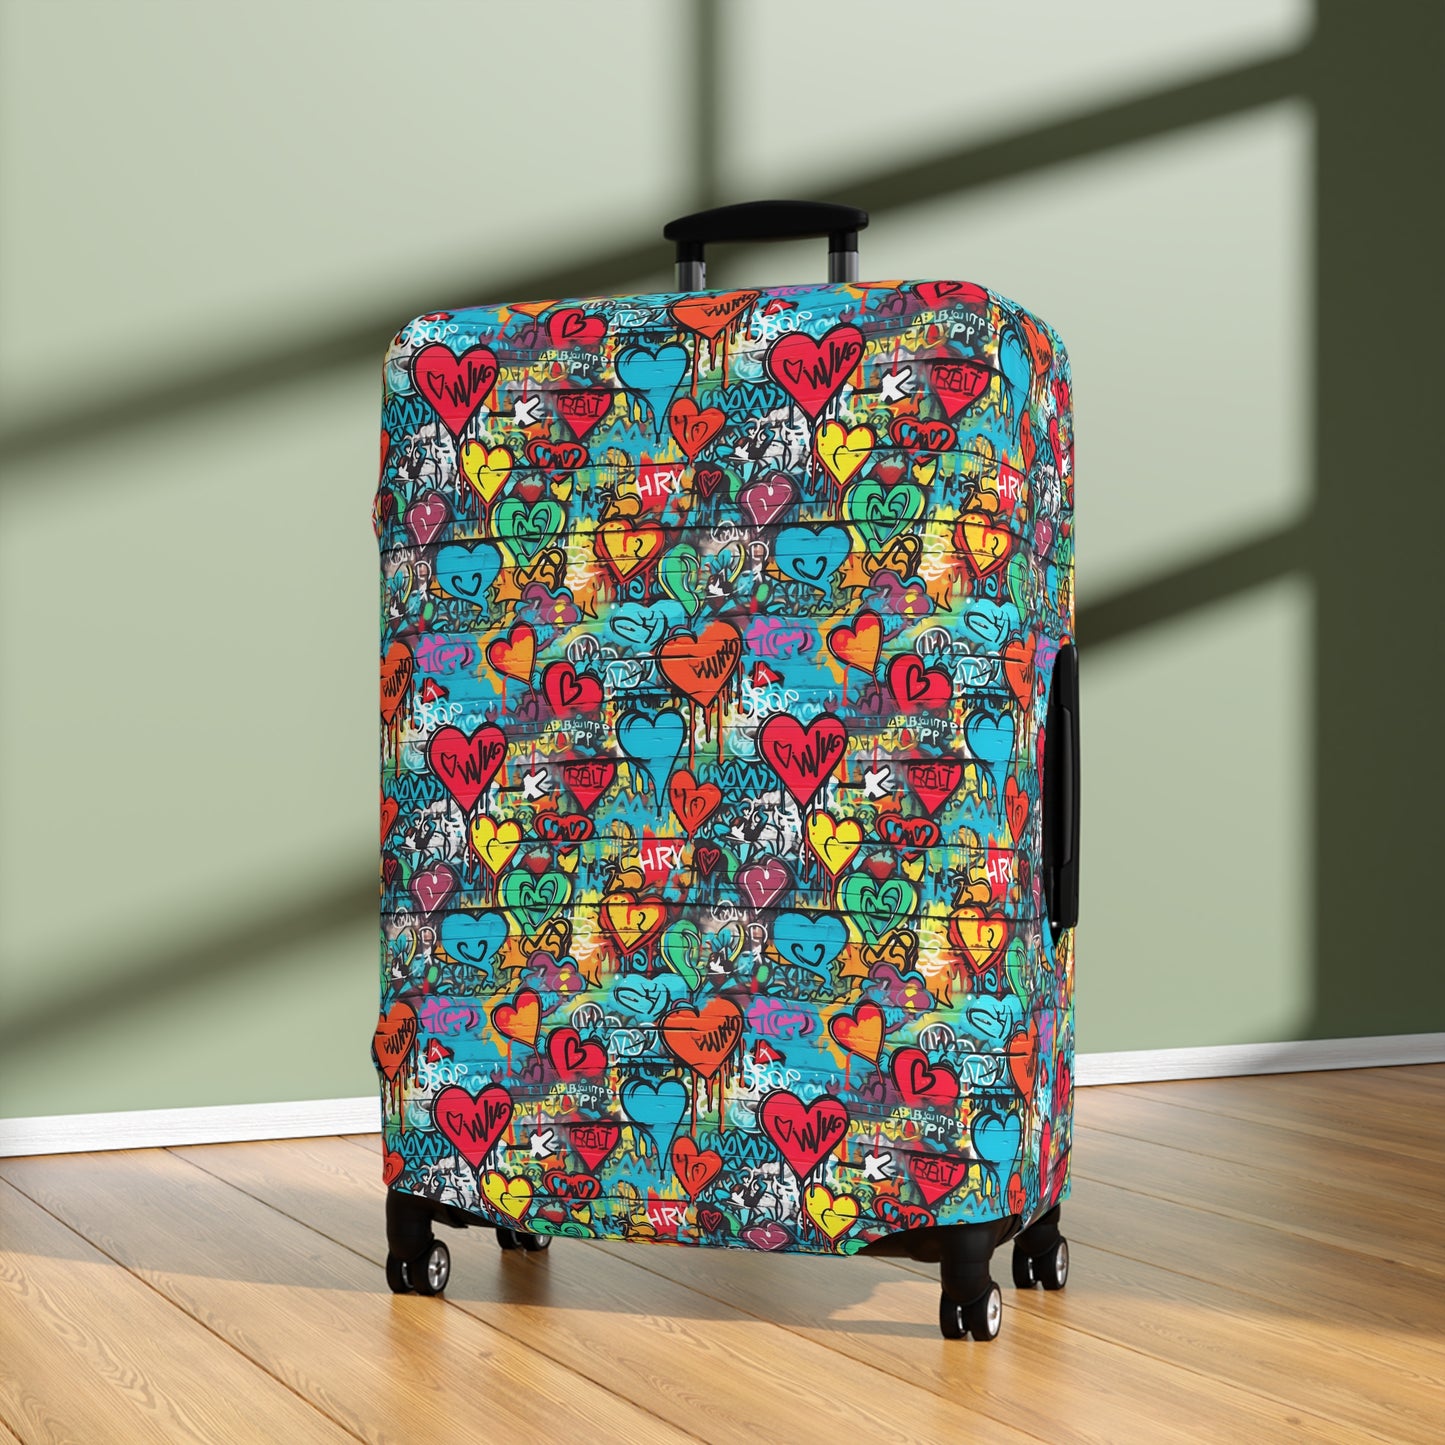 Street Art Graffiti Hearts Design  - Luggage Protector and Cover 3 Sizes